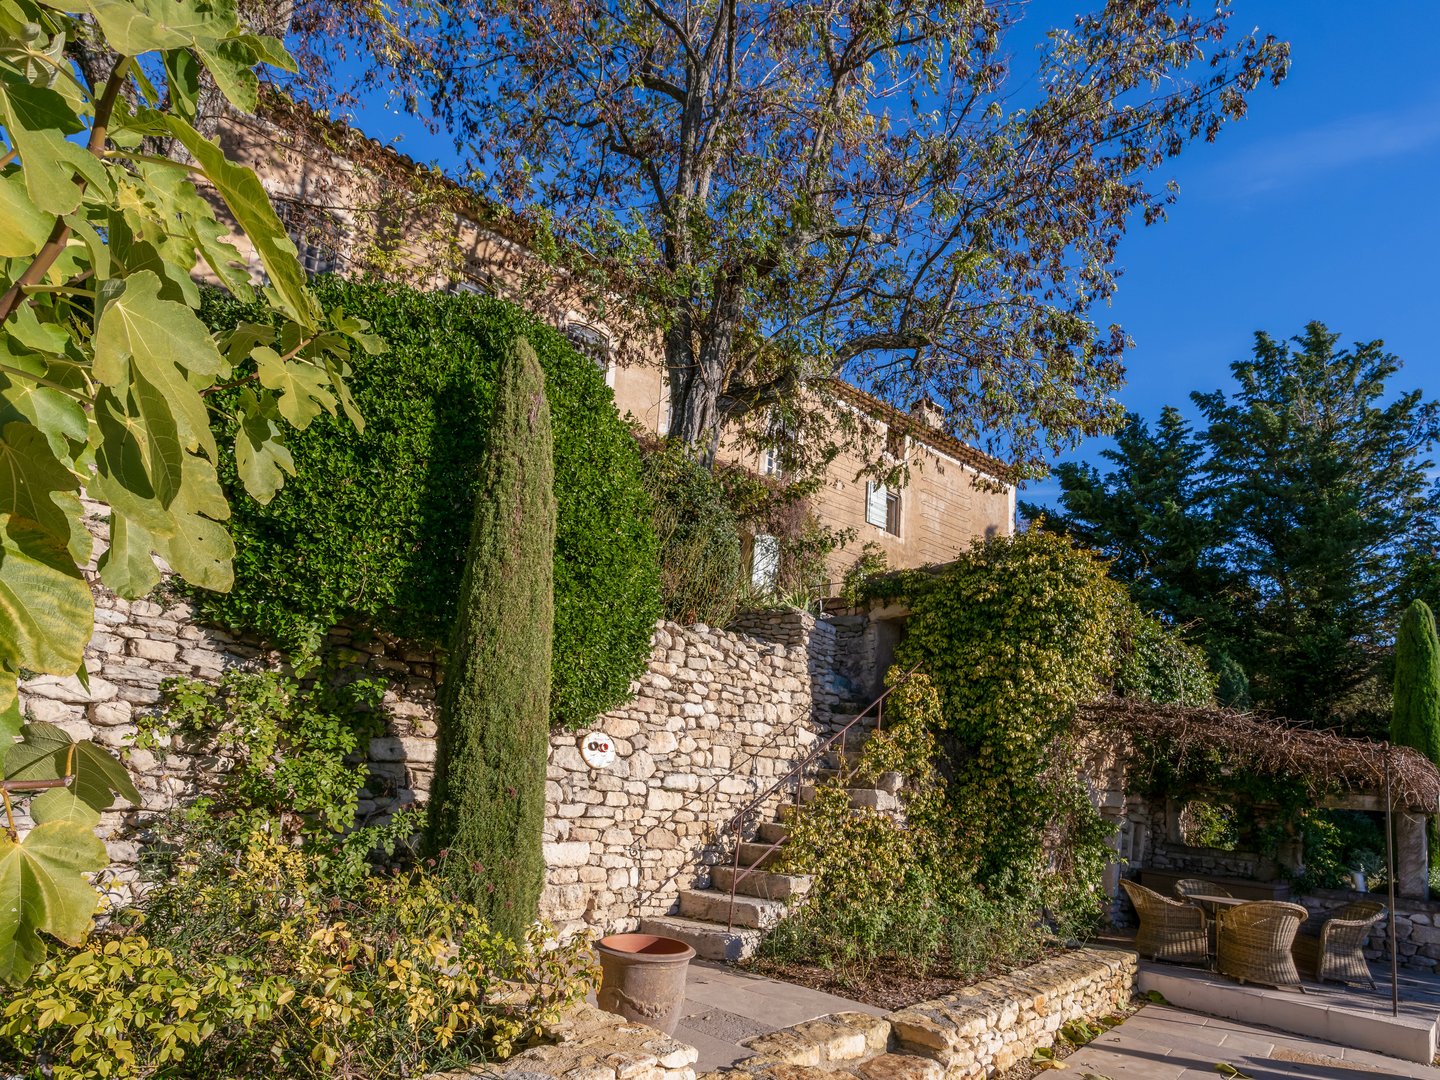 18th century Bastide with views of Luberon for sale - Bonnieux - 26